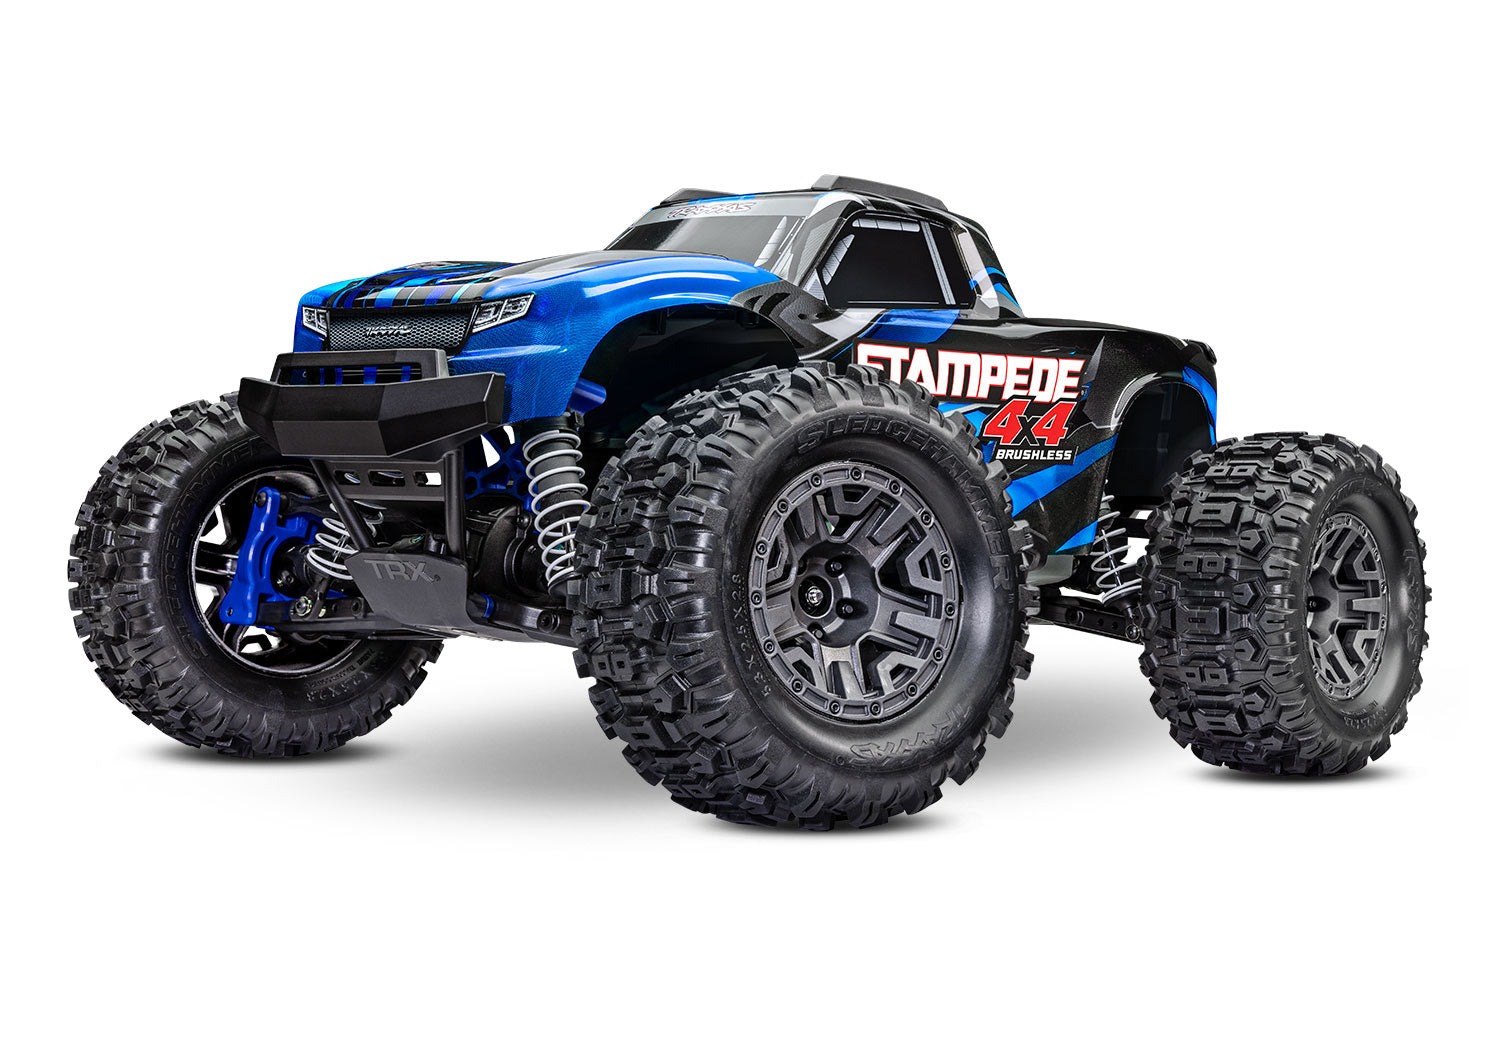 Traxxas Stampede 4x4 BL-2s: 1/10 Scale 4WD Monster Truck (Blue)